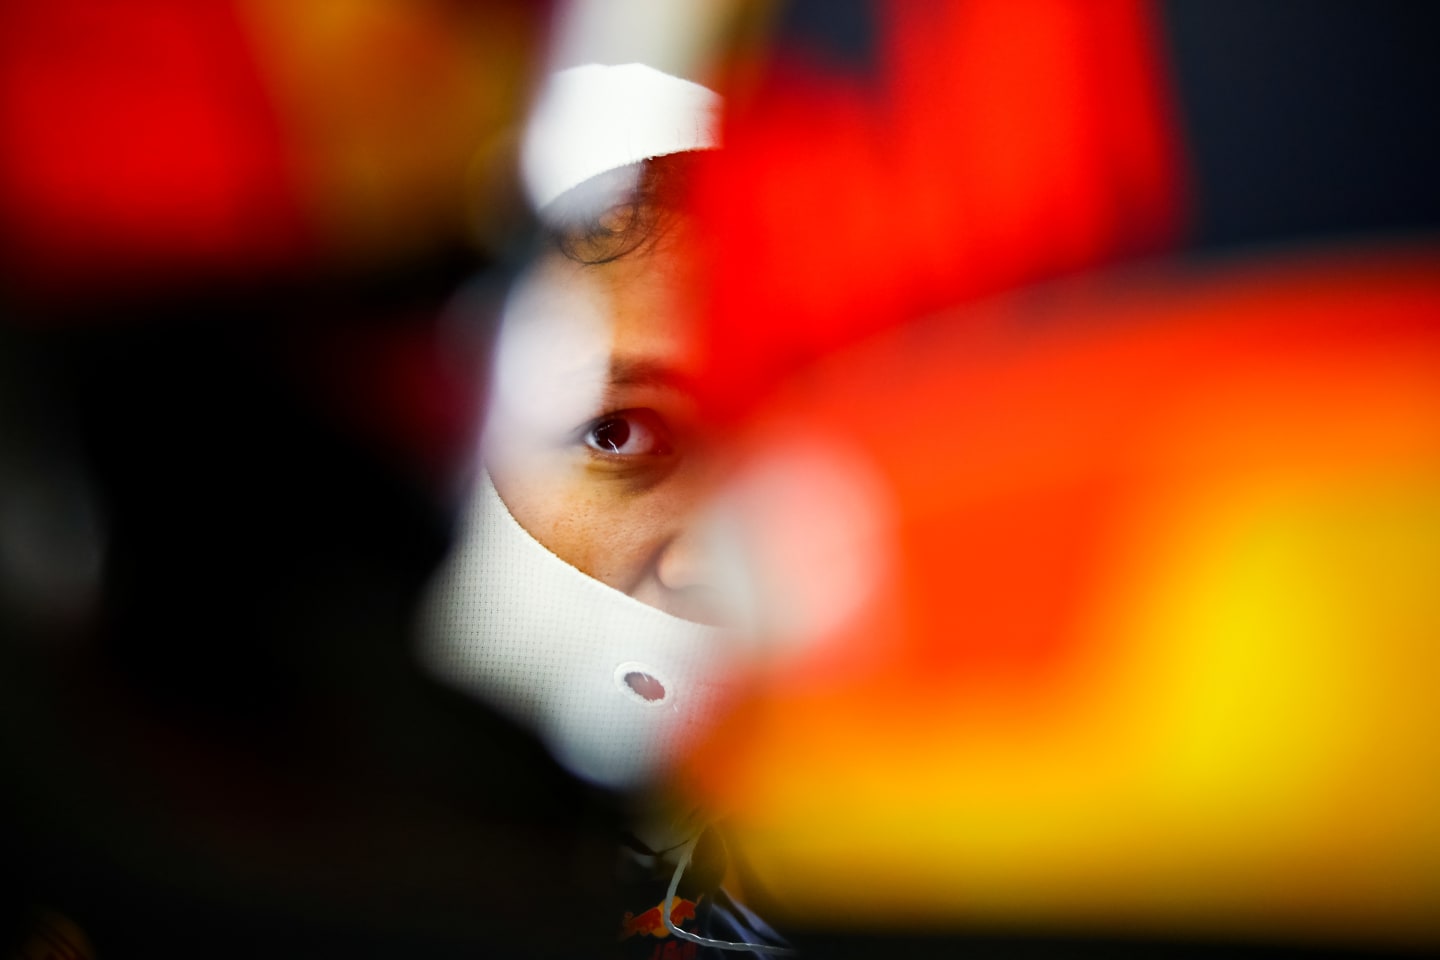 NORTHAMPTON, ENGLAND - AUGUST 01: Alexander Albon of Thailand and Red Bull Racing prepares to drive in the garage during final practice for the F1 Grand Prix of Great Britain at Silverstone on August 01, 2020 in Northampton, England. (Photo by Mark Thompson/Getty Images)